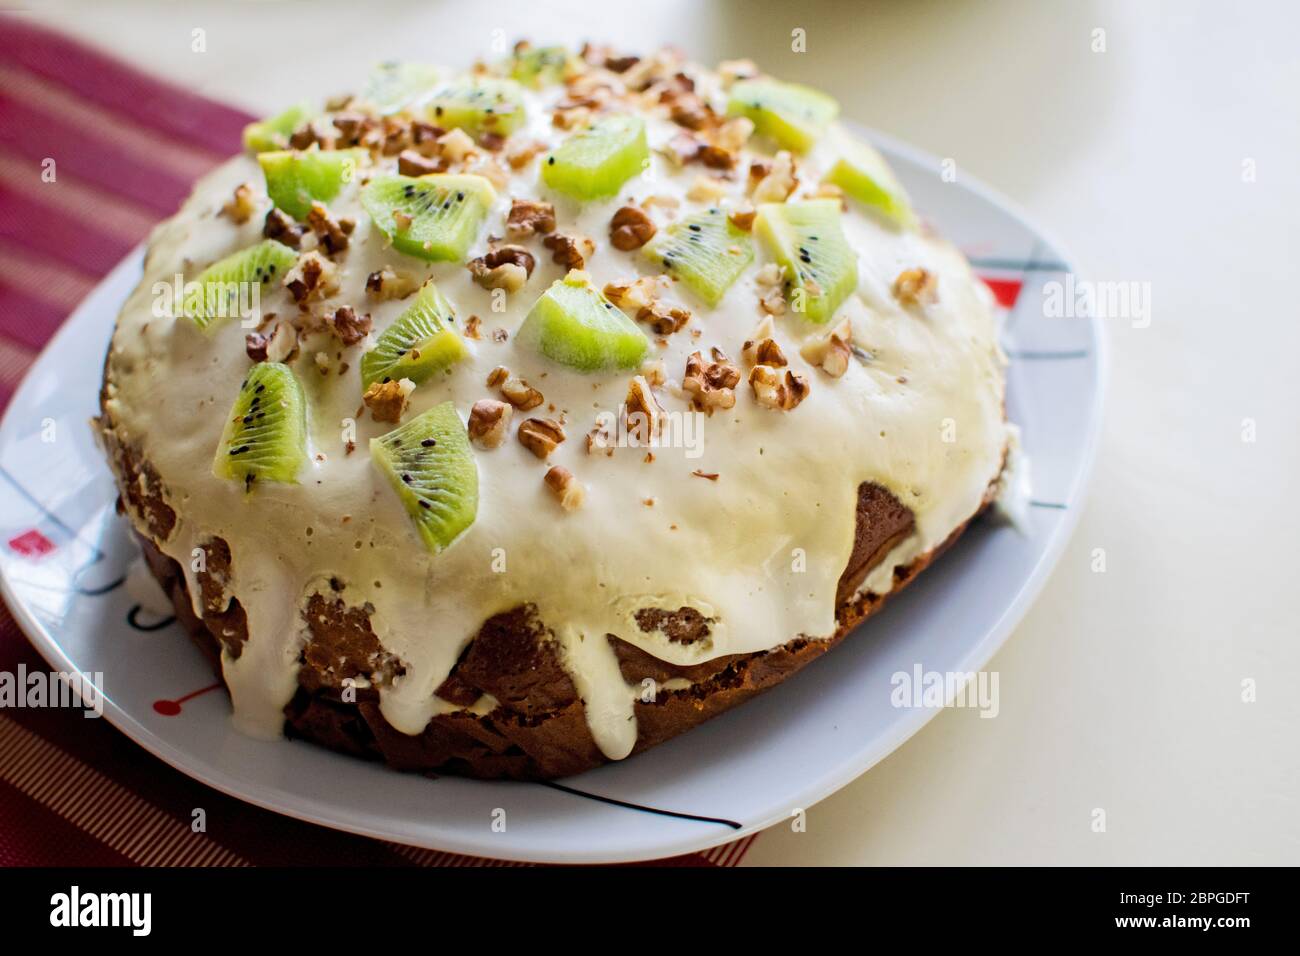 Plate with homemade kiwi cake with nuts. Easter cake. Stock Photo